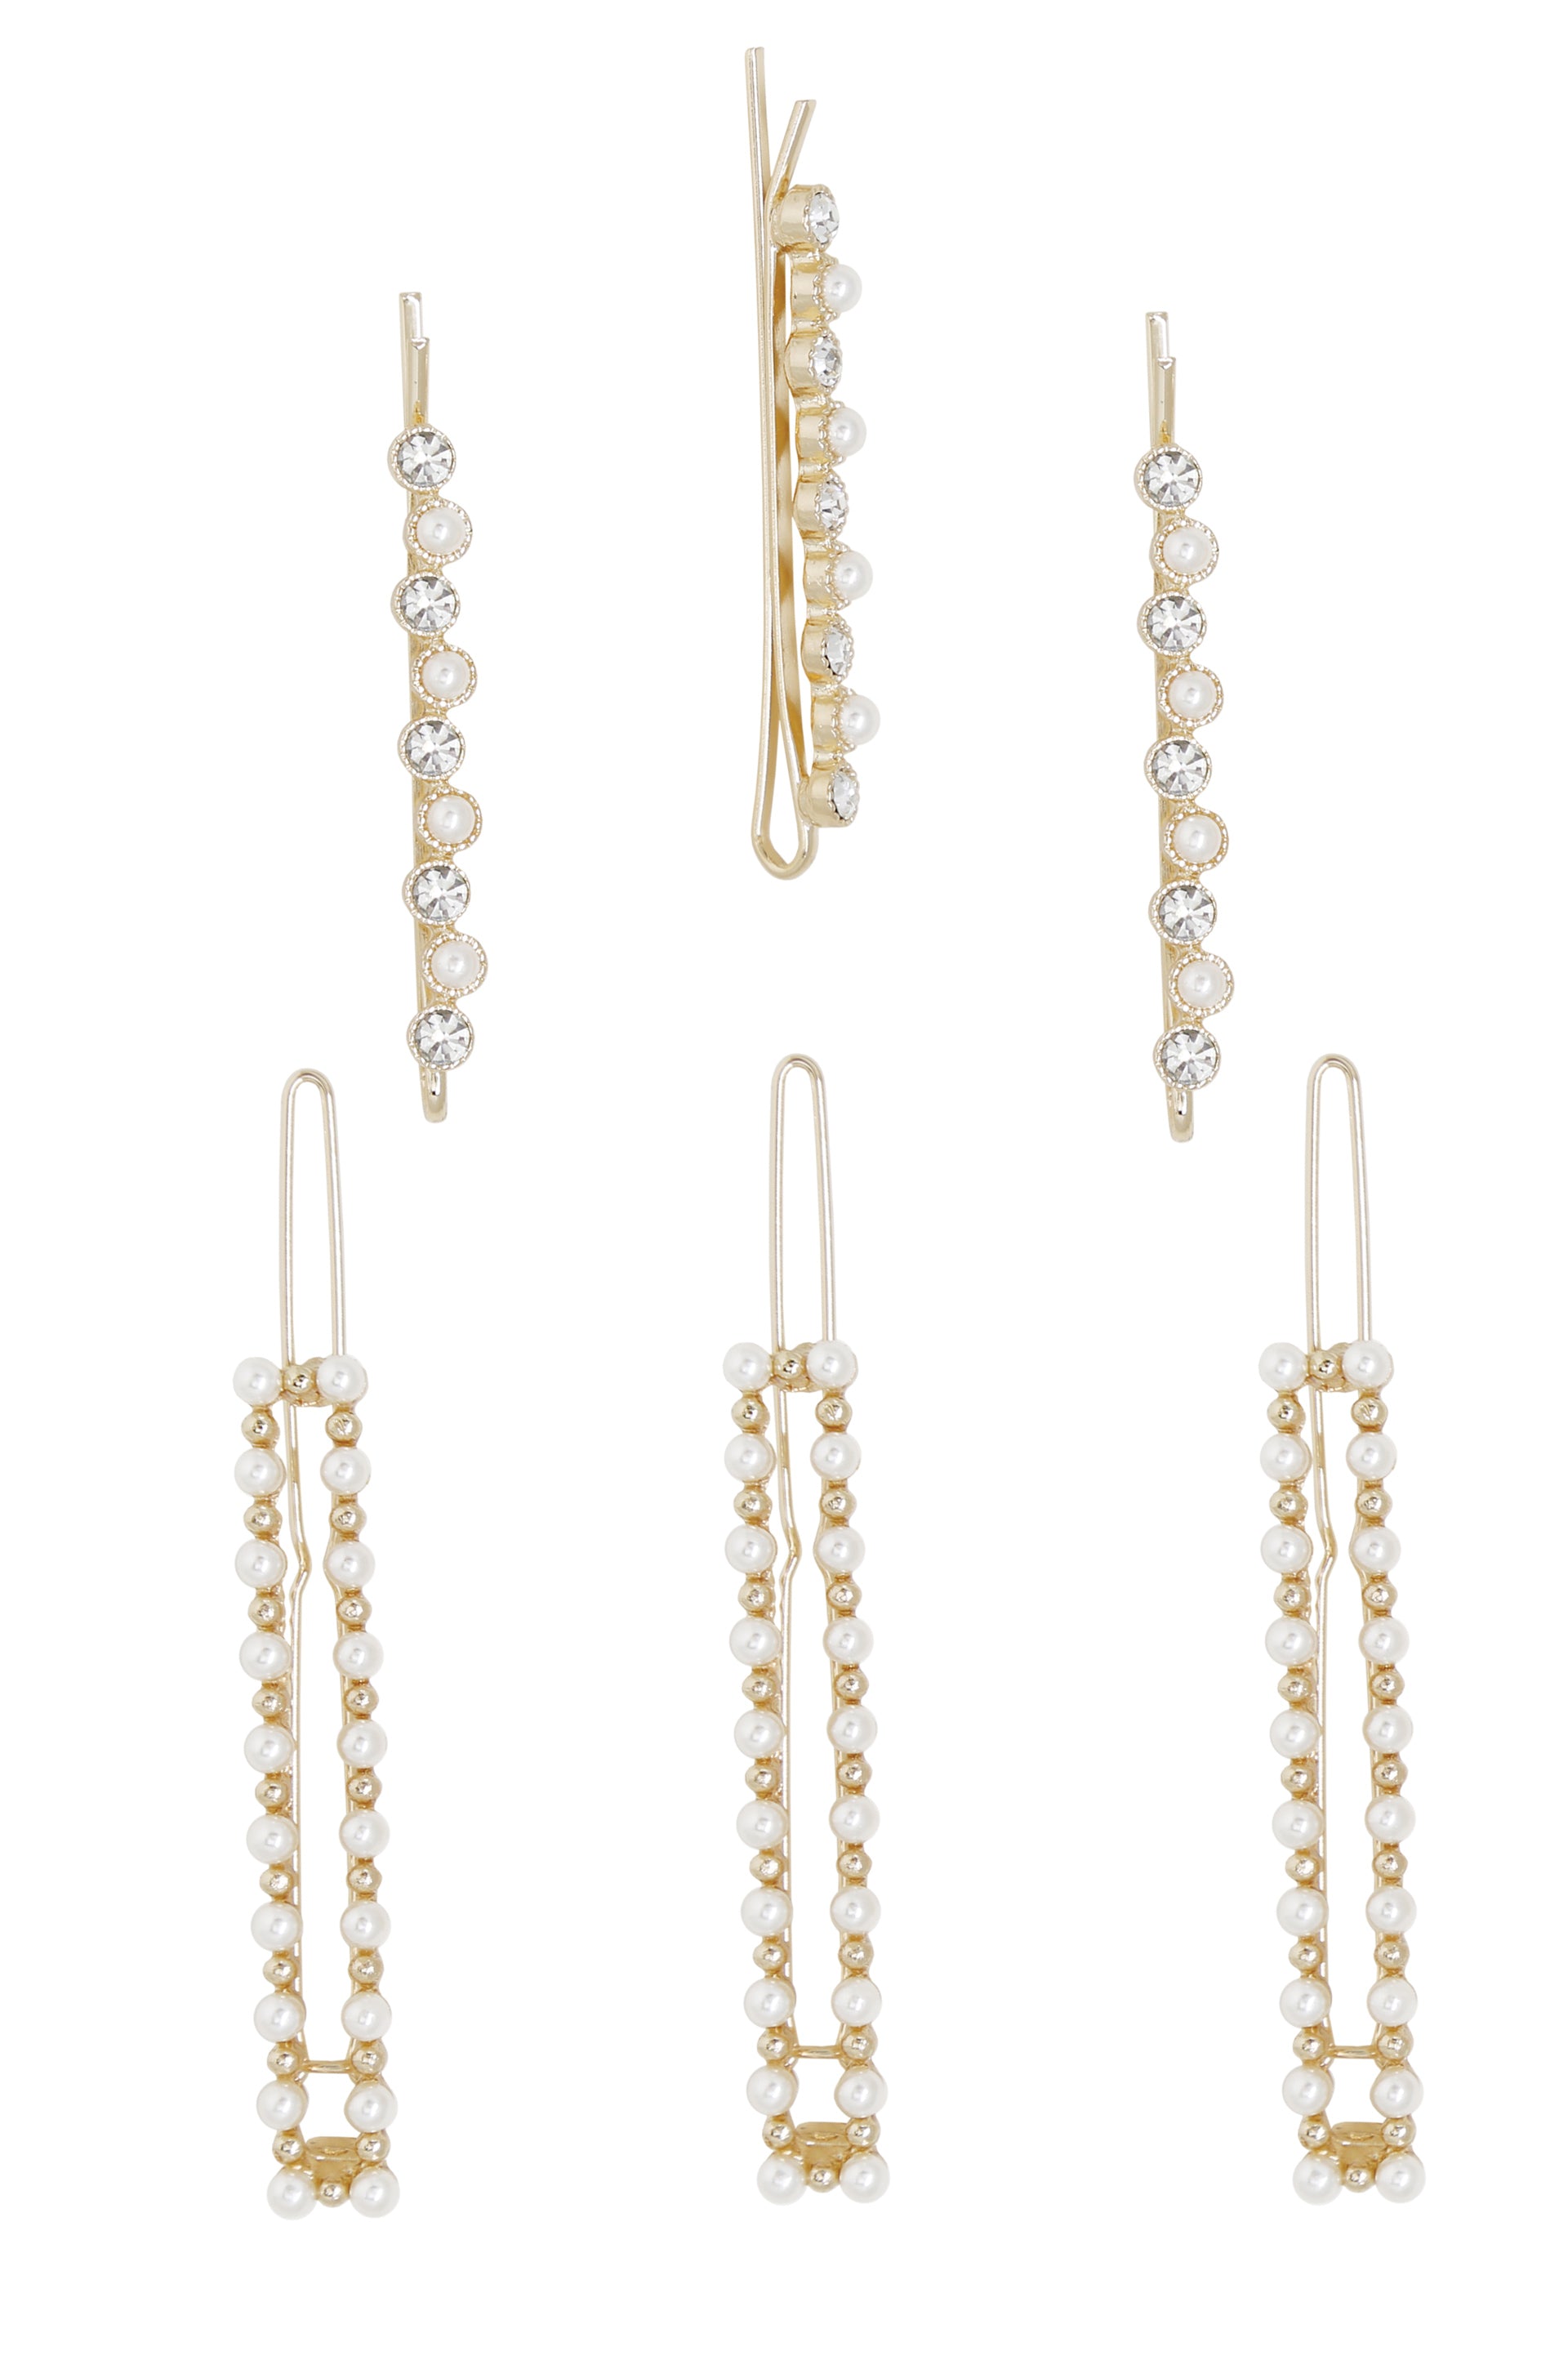 Pearl and Clear Crystal Mixed Hair Pin Set of 6 on white background  